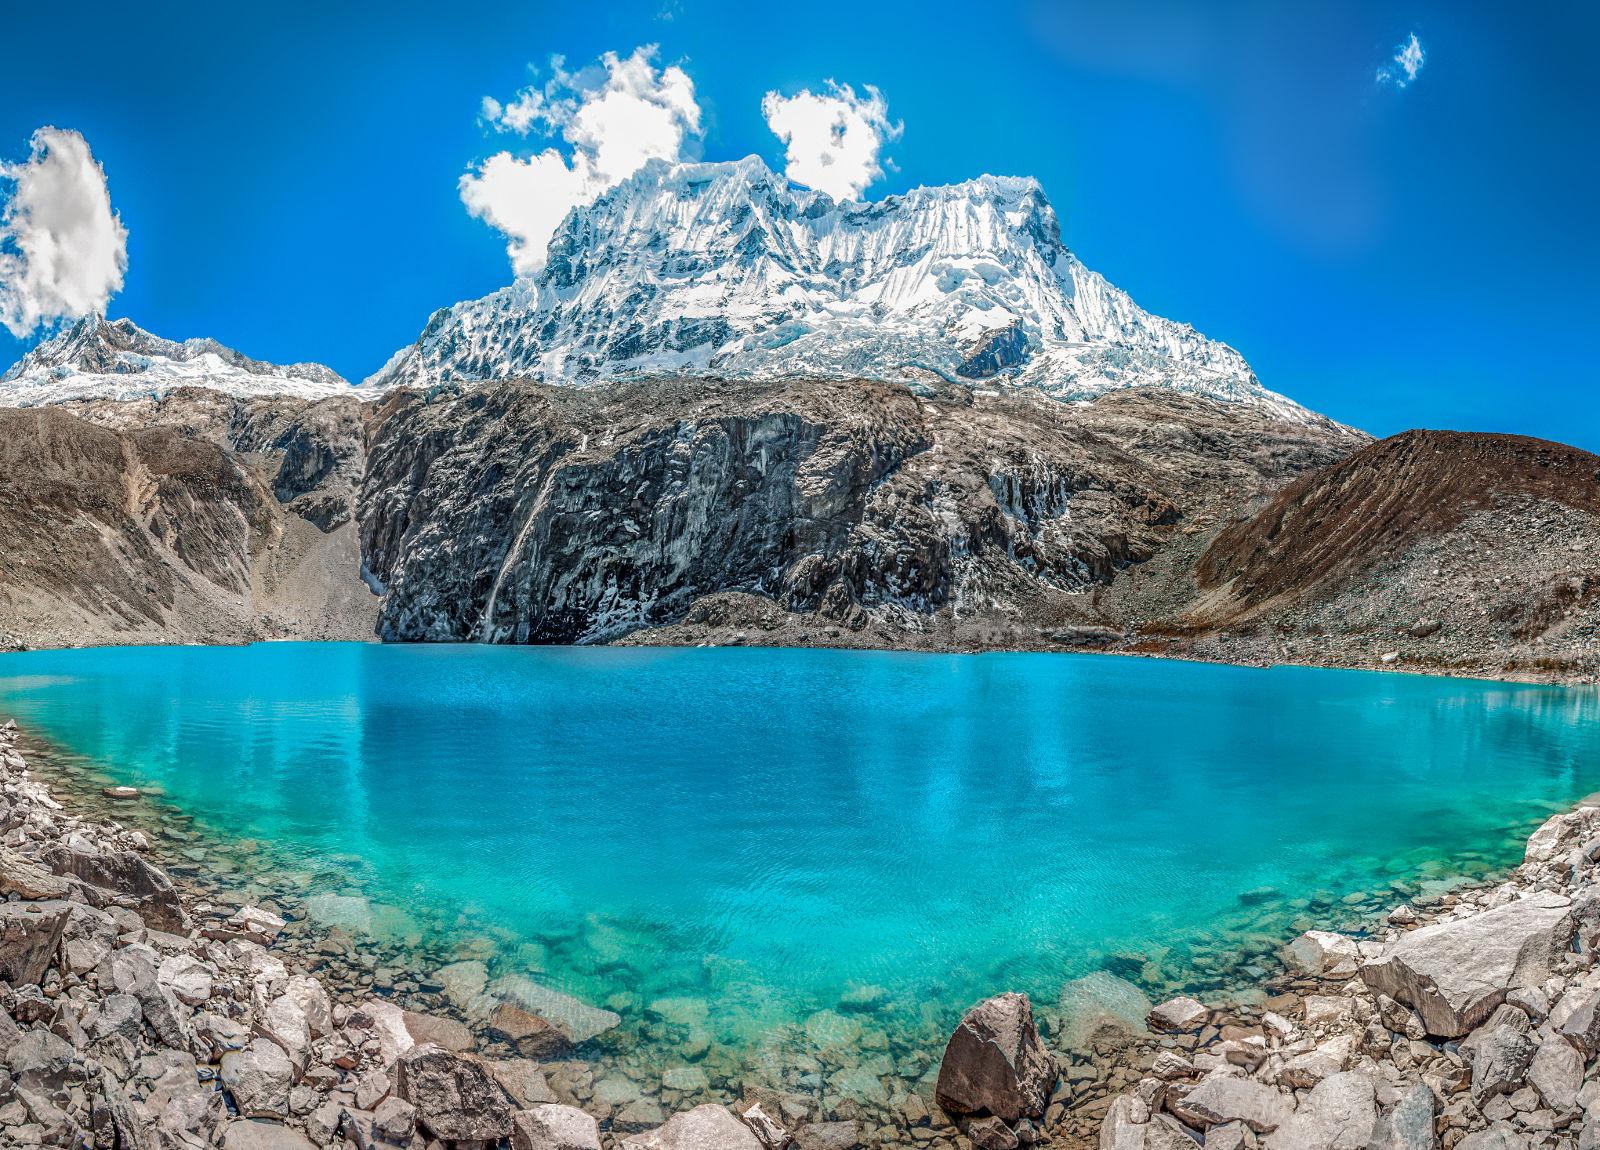 Peruvian mountain with a vivid blue lake in front of it